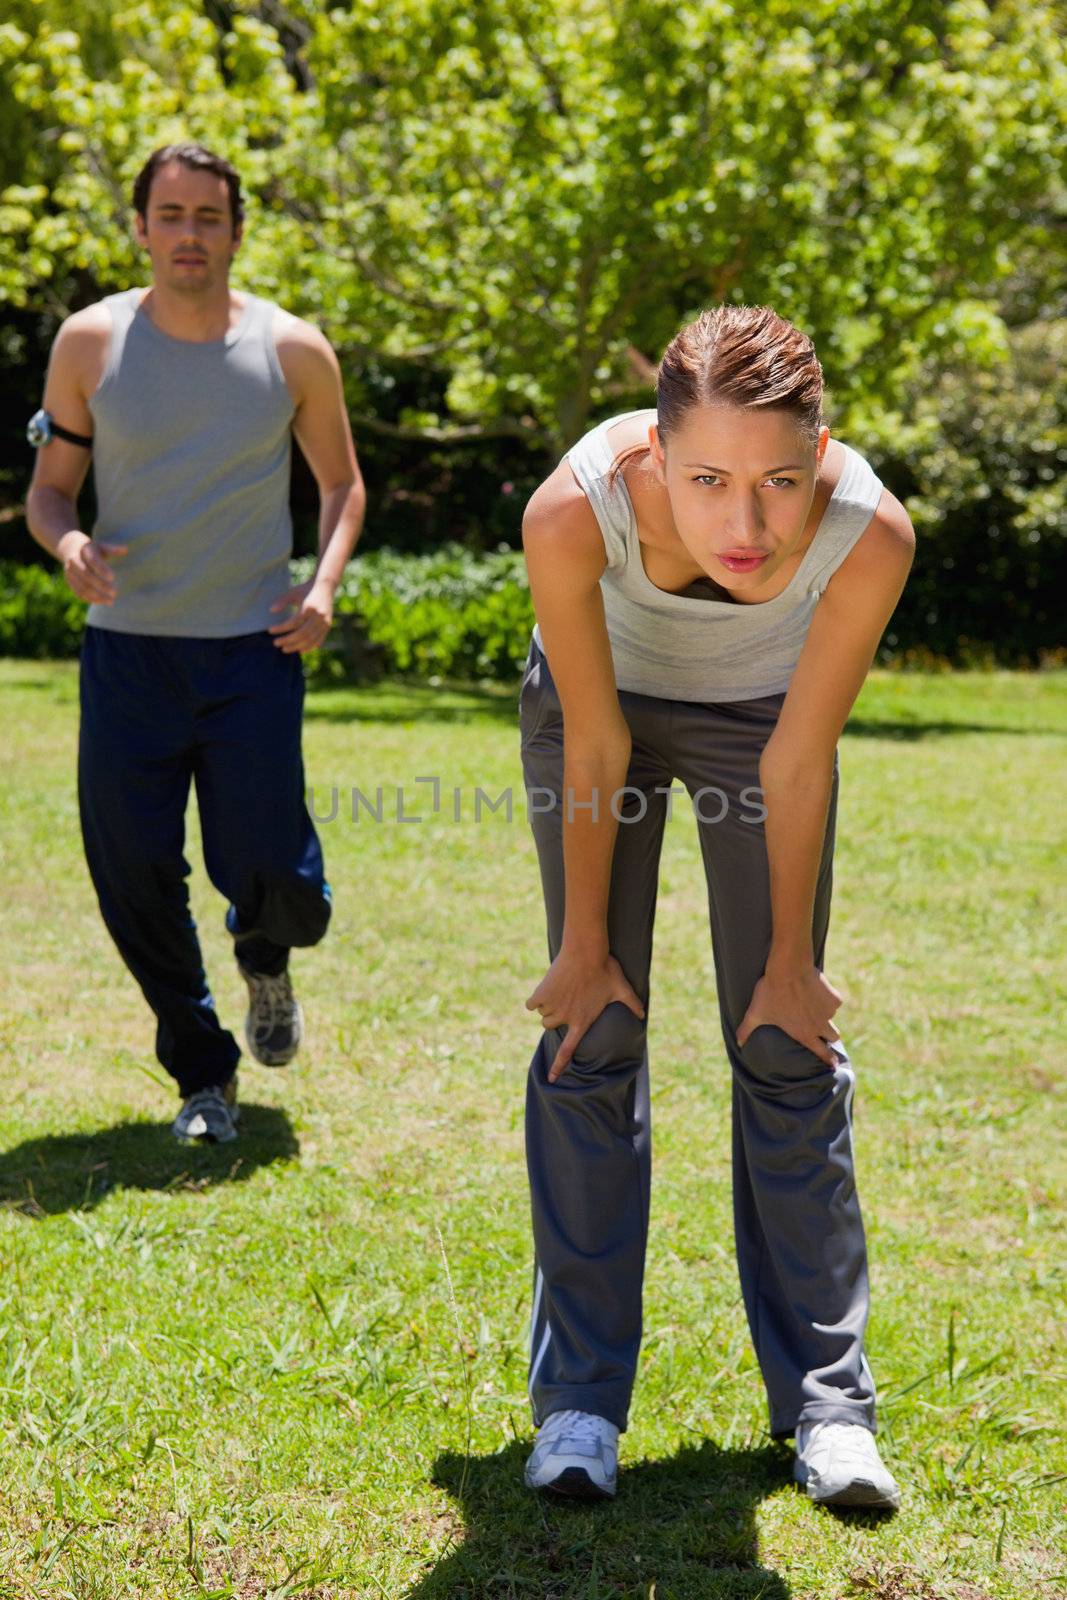 Woman bending over while a man is jogging in the background by Wavebreakmedia